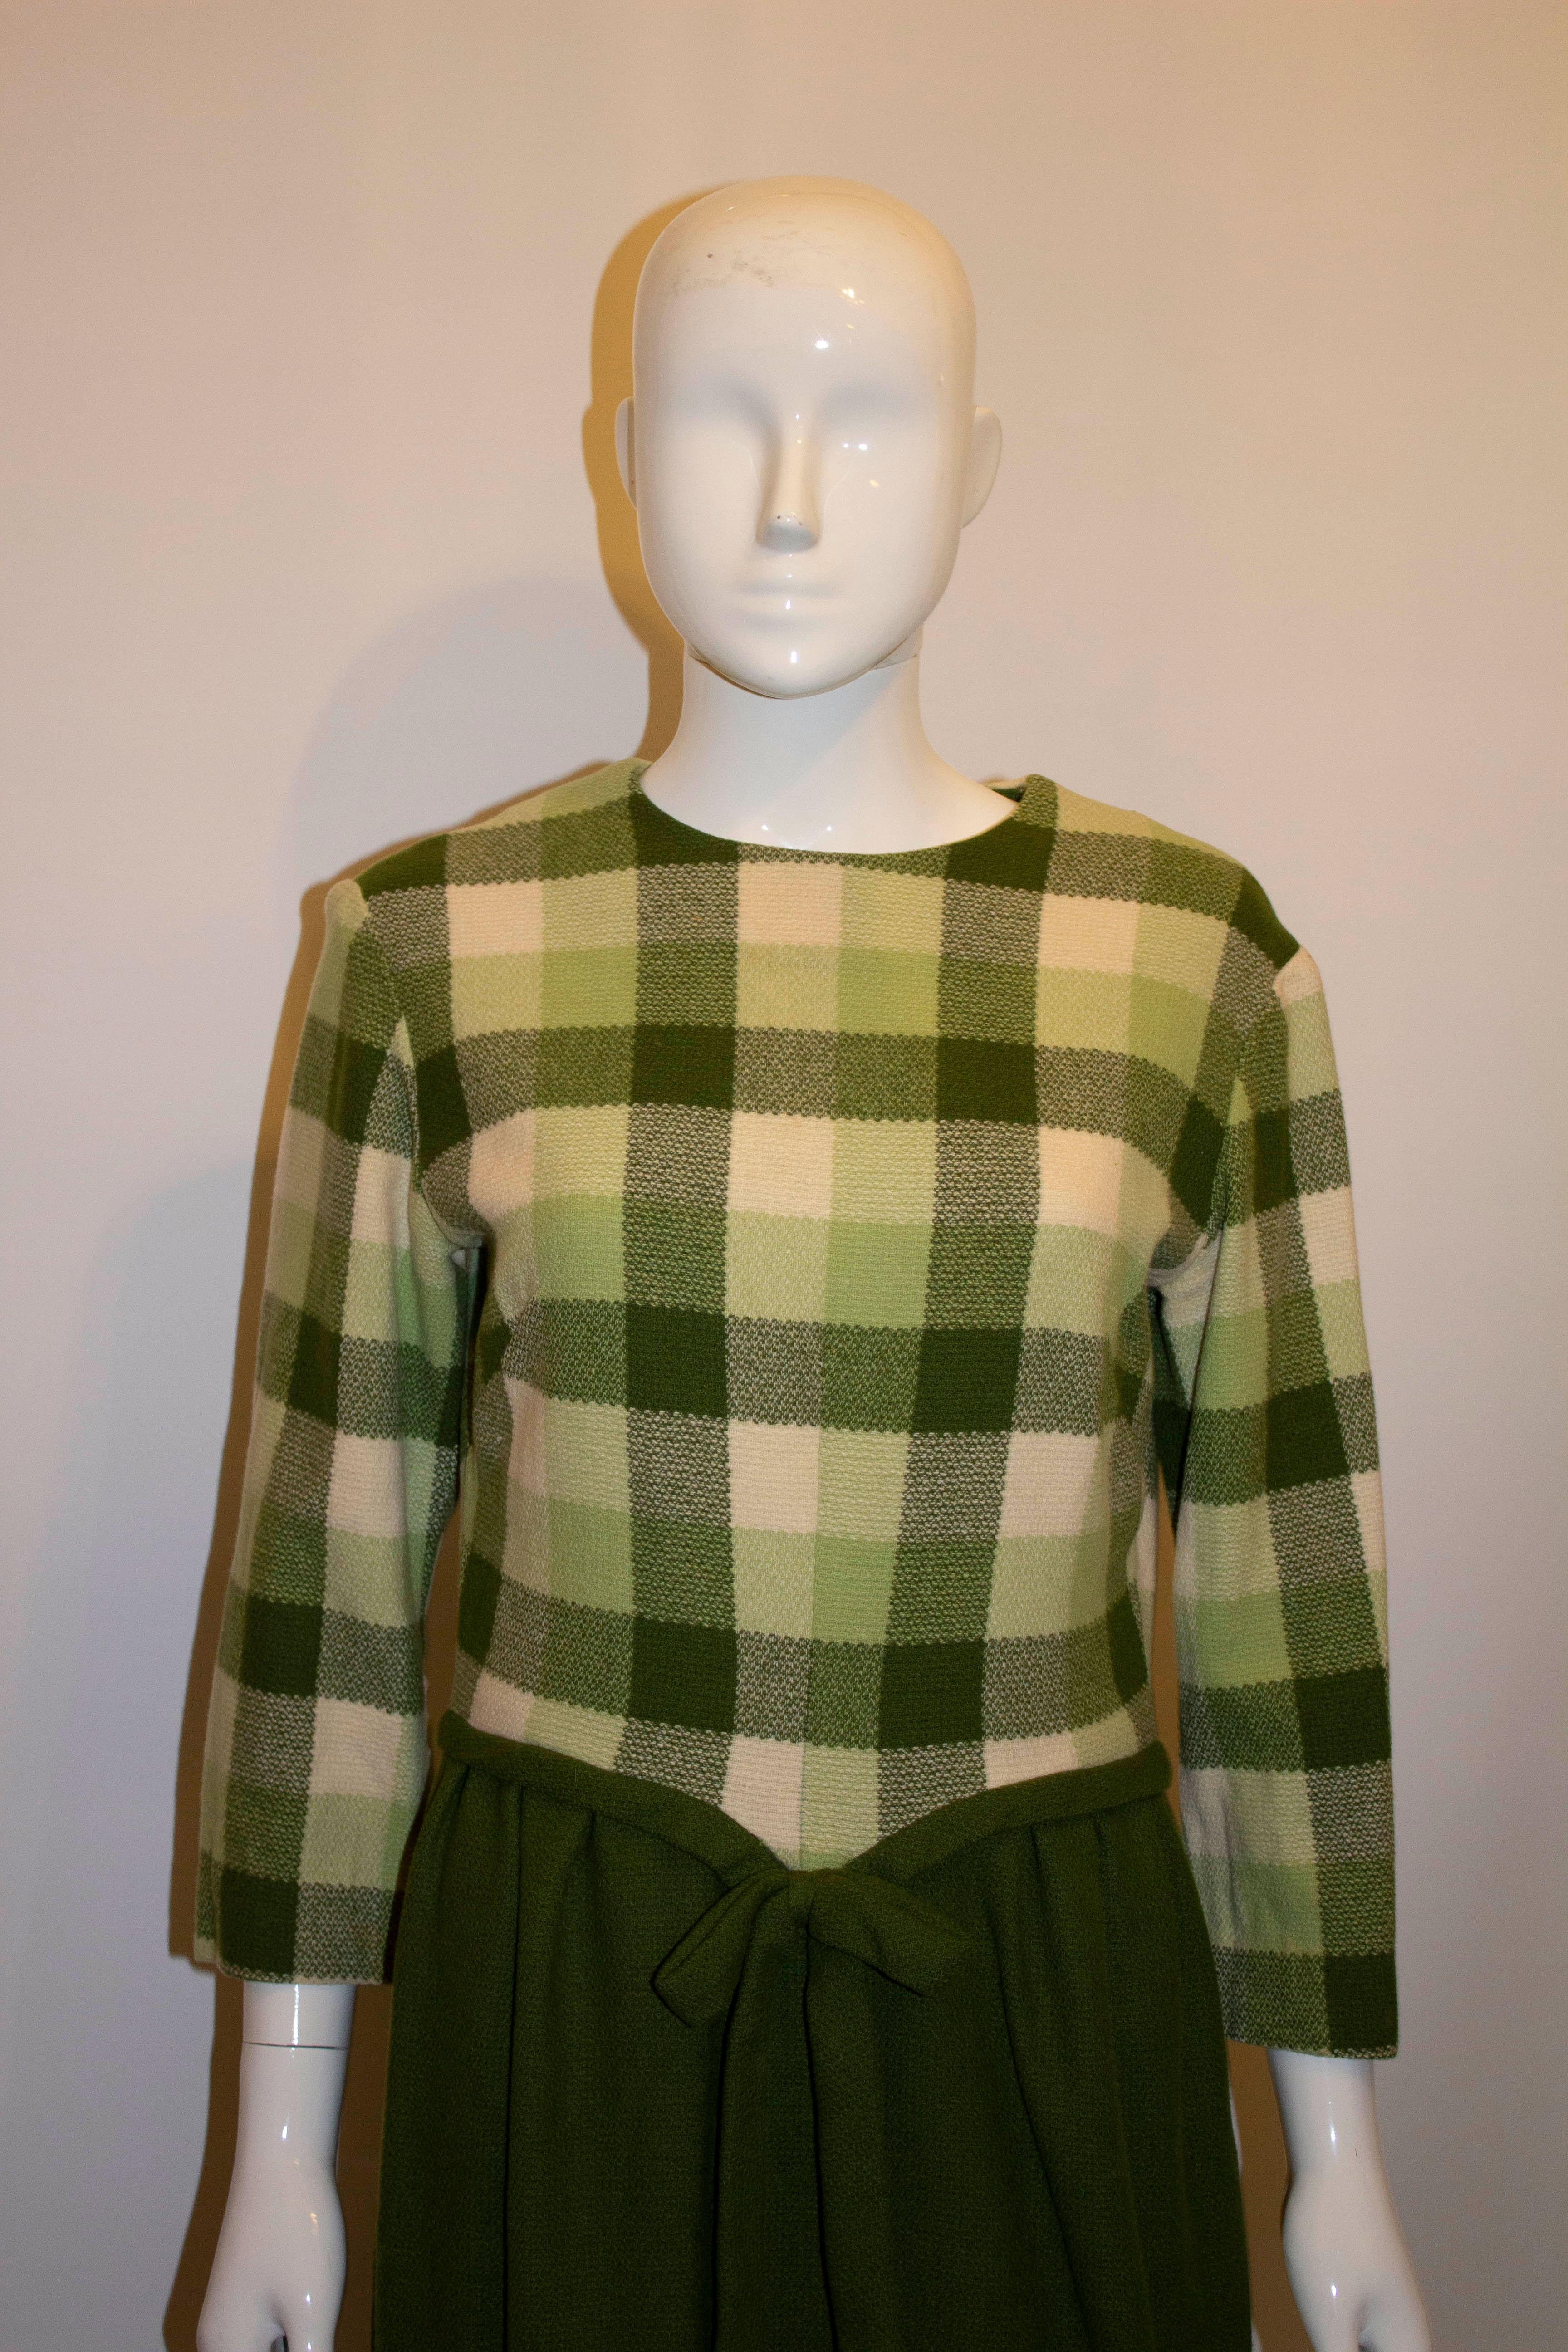 A fun and easy to wear vintage green and white day dress. The dress has a green and white check bodice /upper area with a plain green skirt. It has gathering from the waist and a nice belt detail at the front. It has a central back zip and is